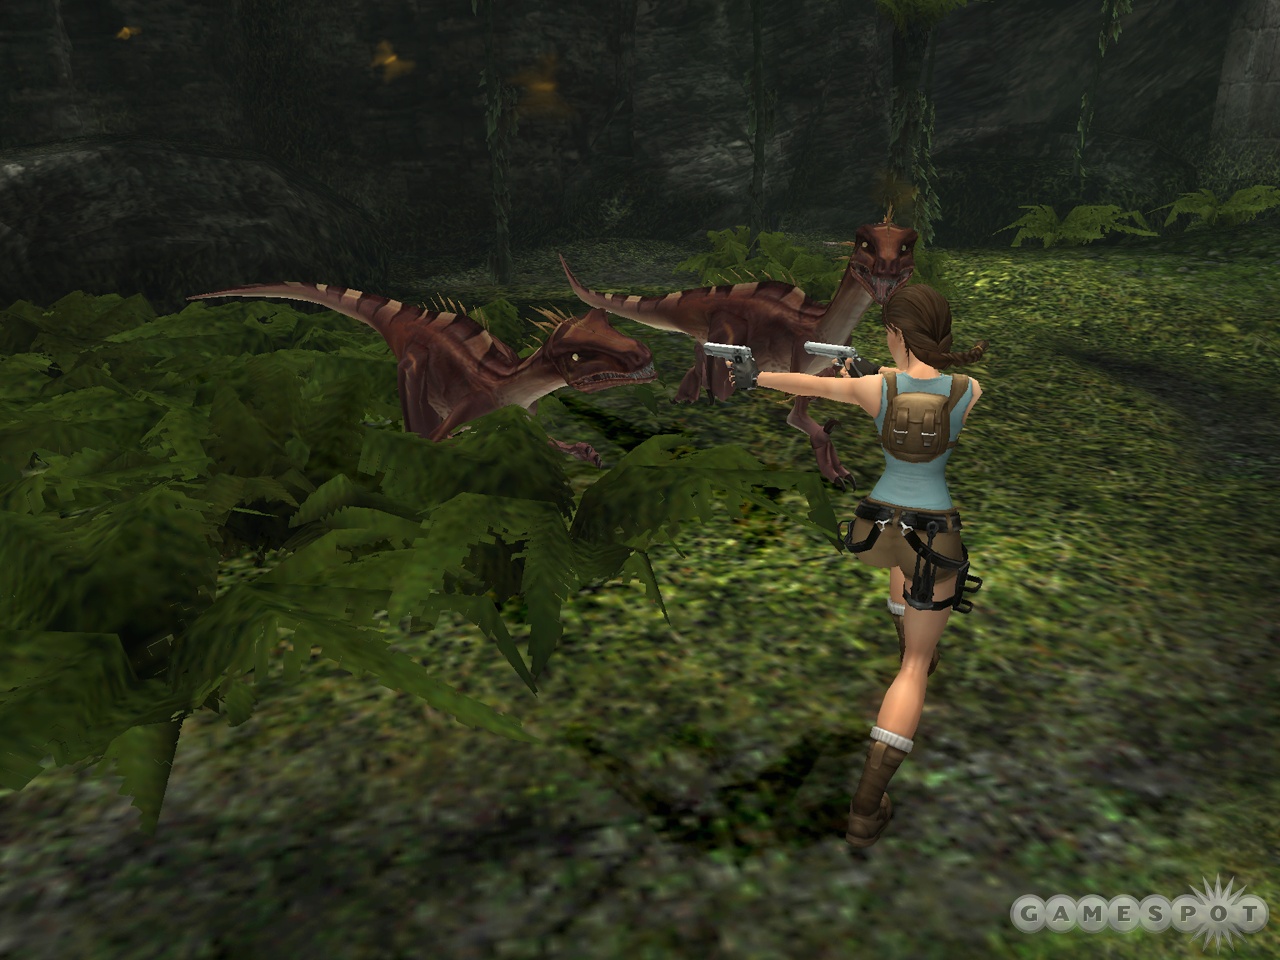 Along the way, Lara will also do plenty of running, jumping, and shooting.